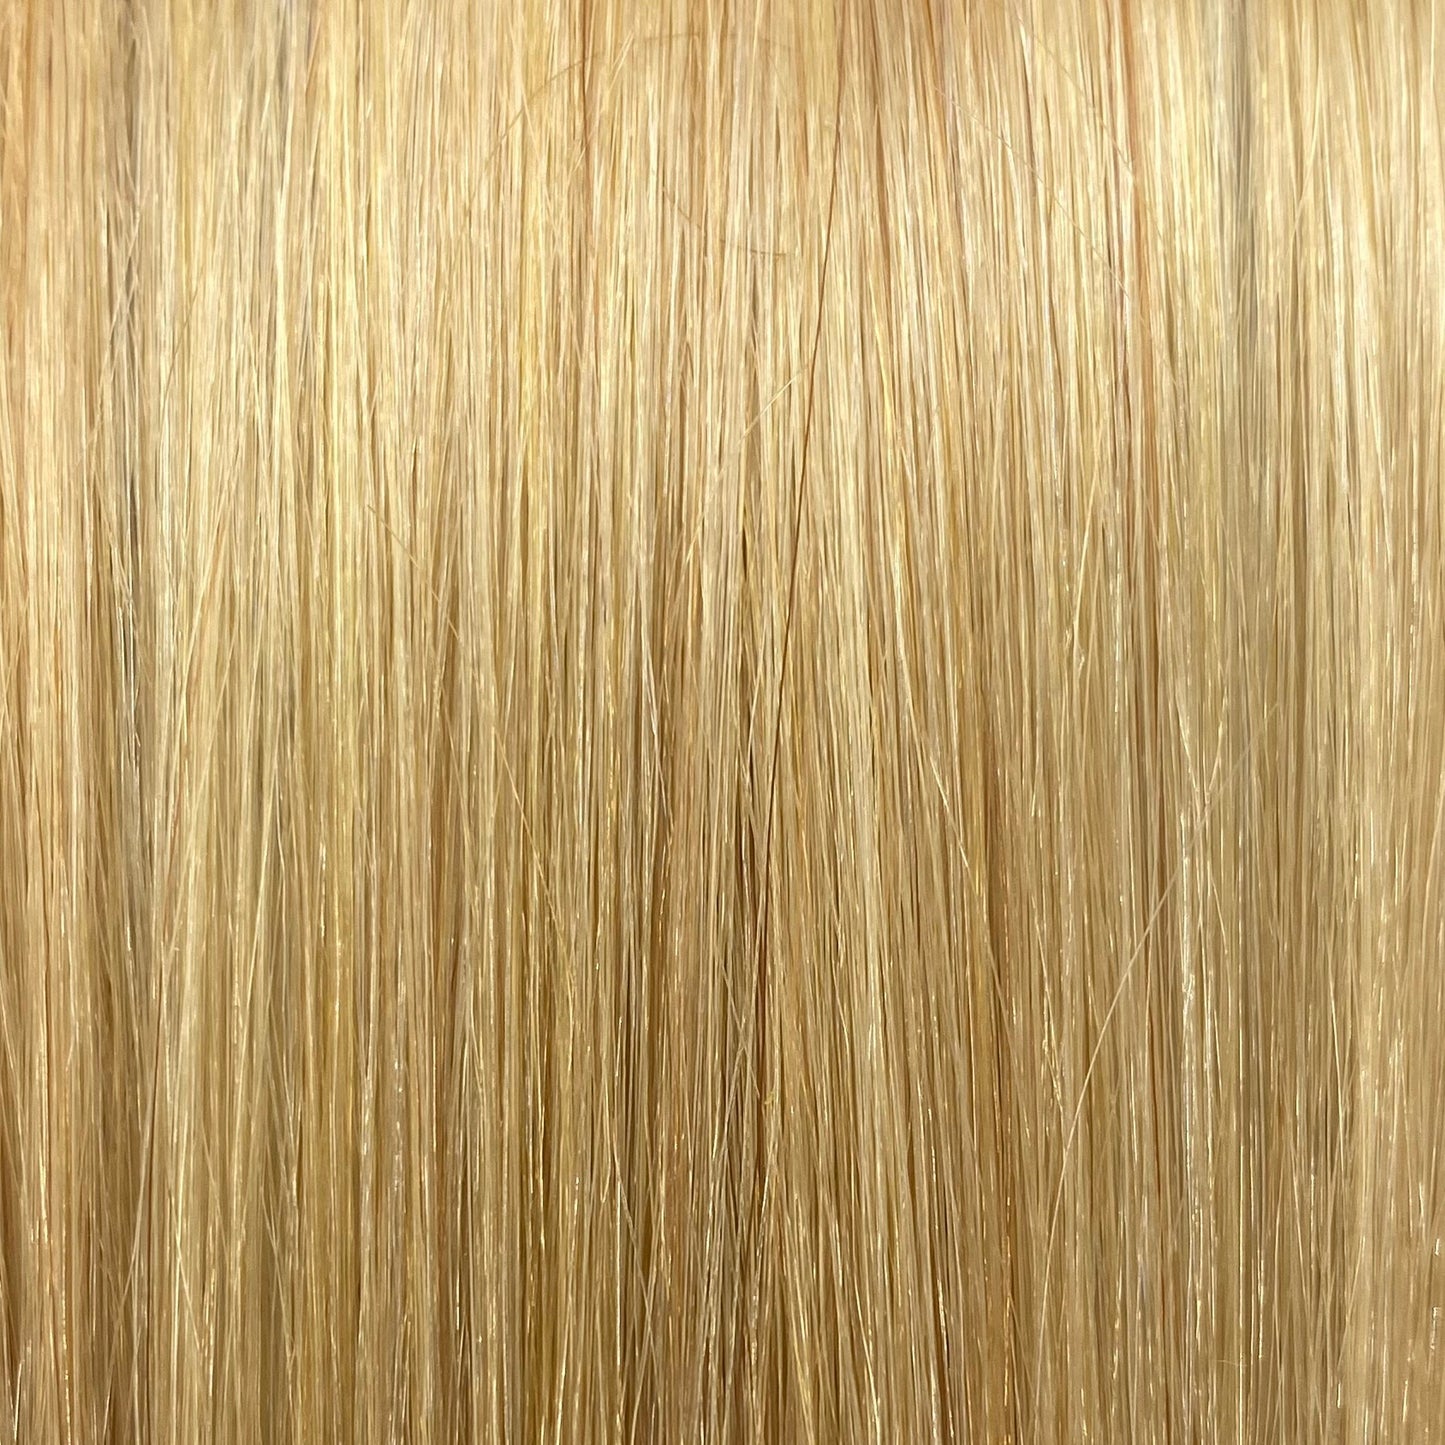 Fusion hair extensions #DB2 - 40cm/16 inches - Light Golden Blonde Fusion Euro So Cap 